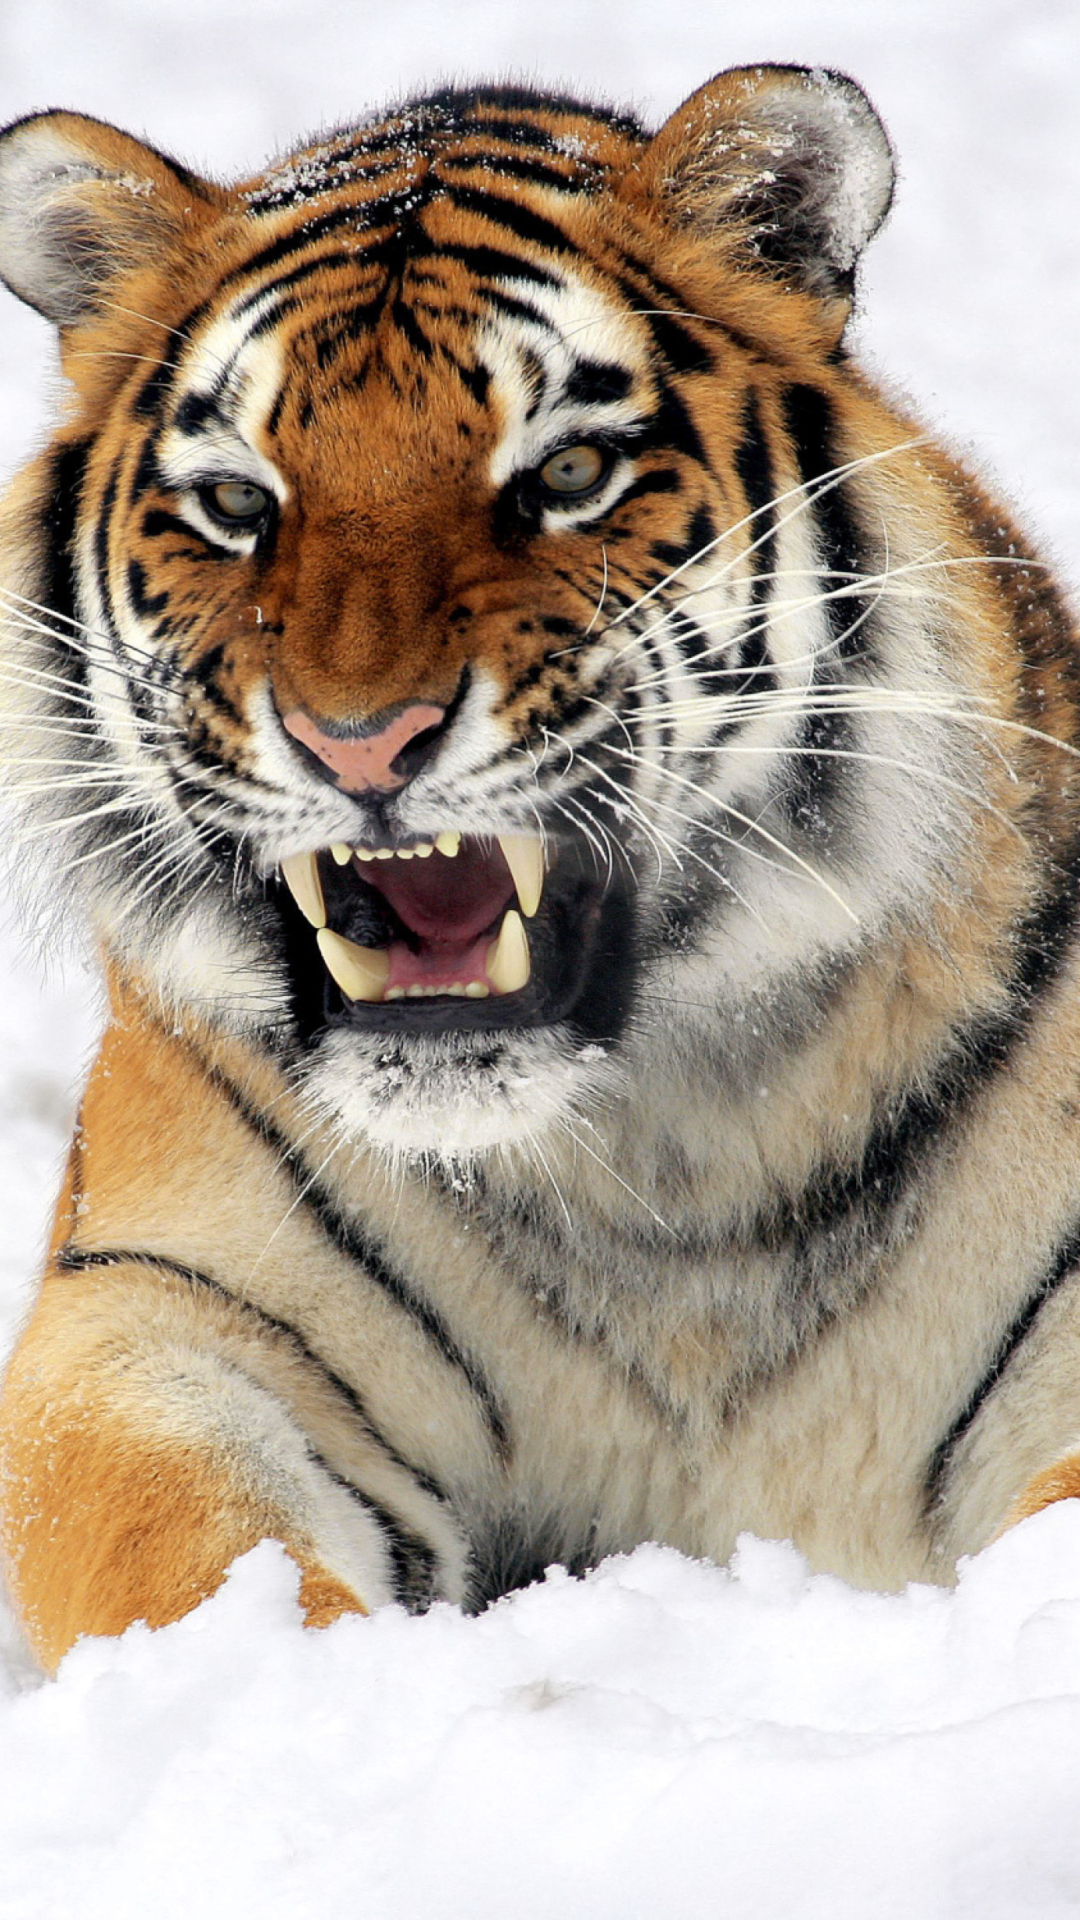 Tiger In The Snow wallpaper 1080x1920